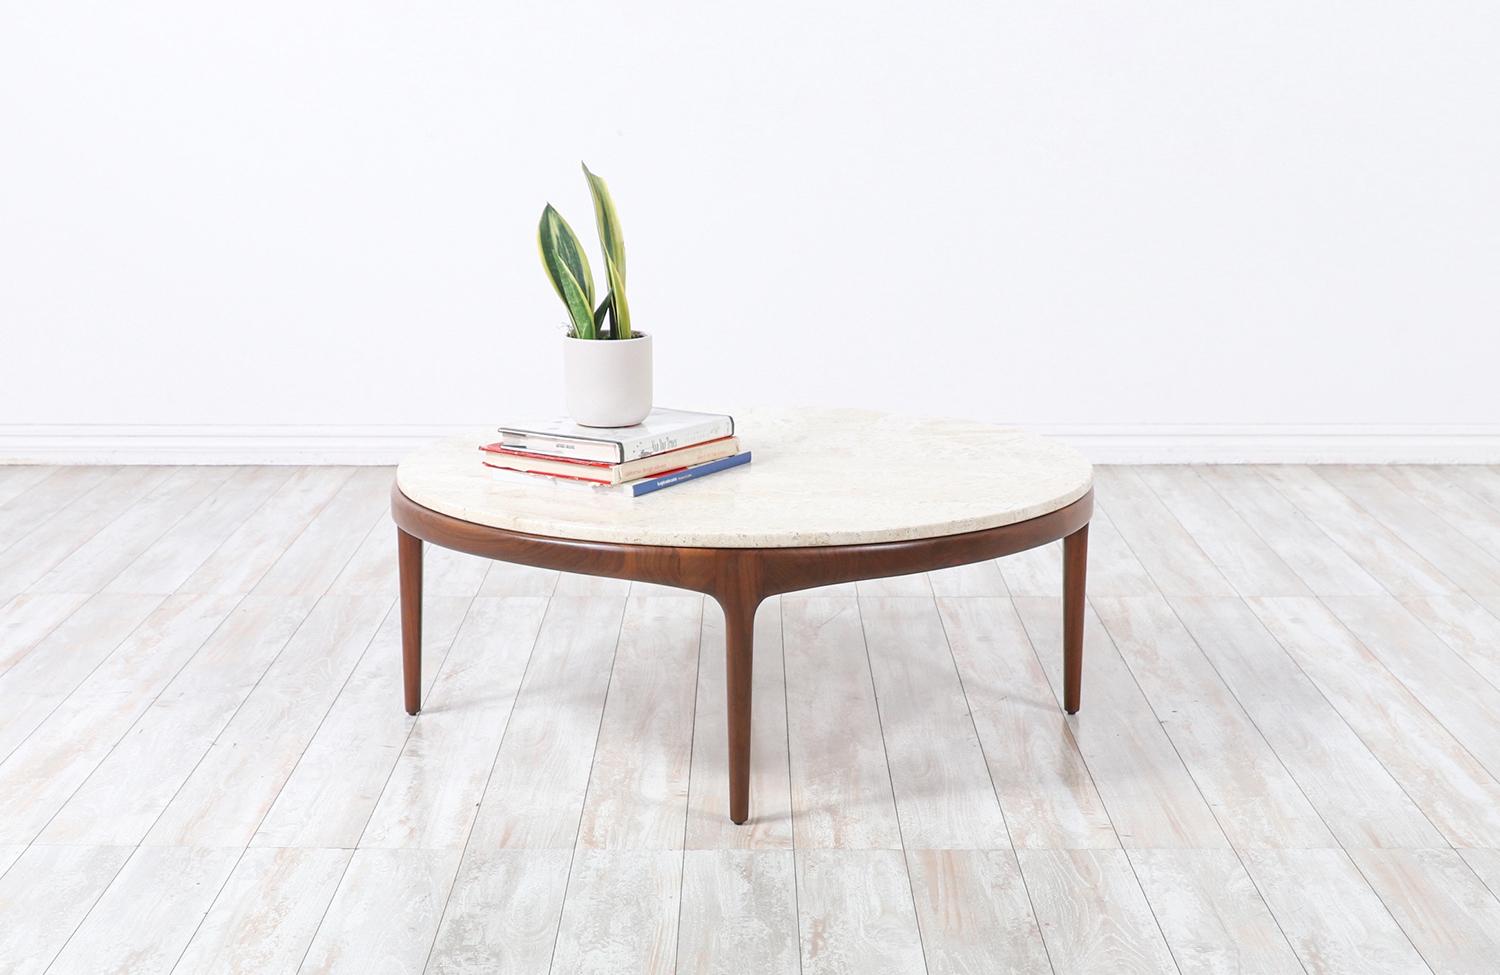 Mid-Century Modern “Rythm” Coffee Table with Travertine Stone Top by Lane.